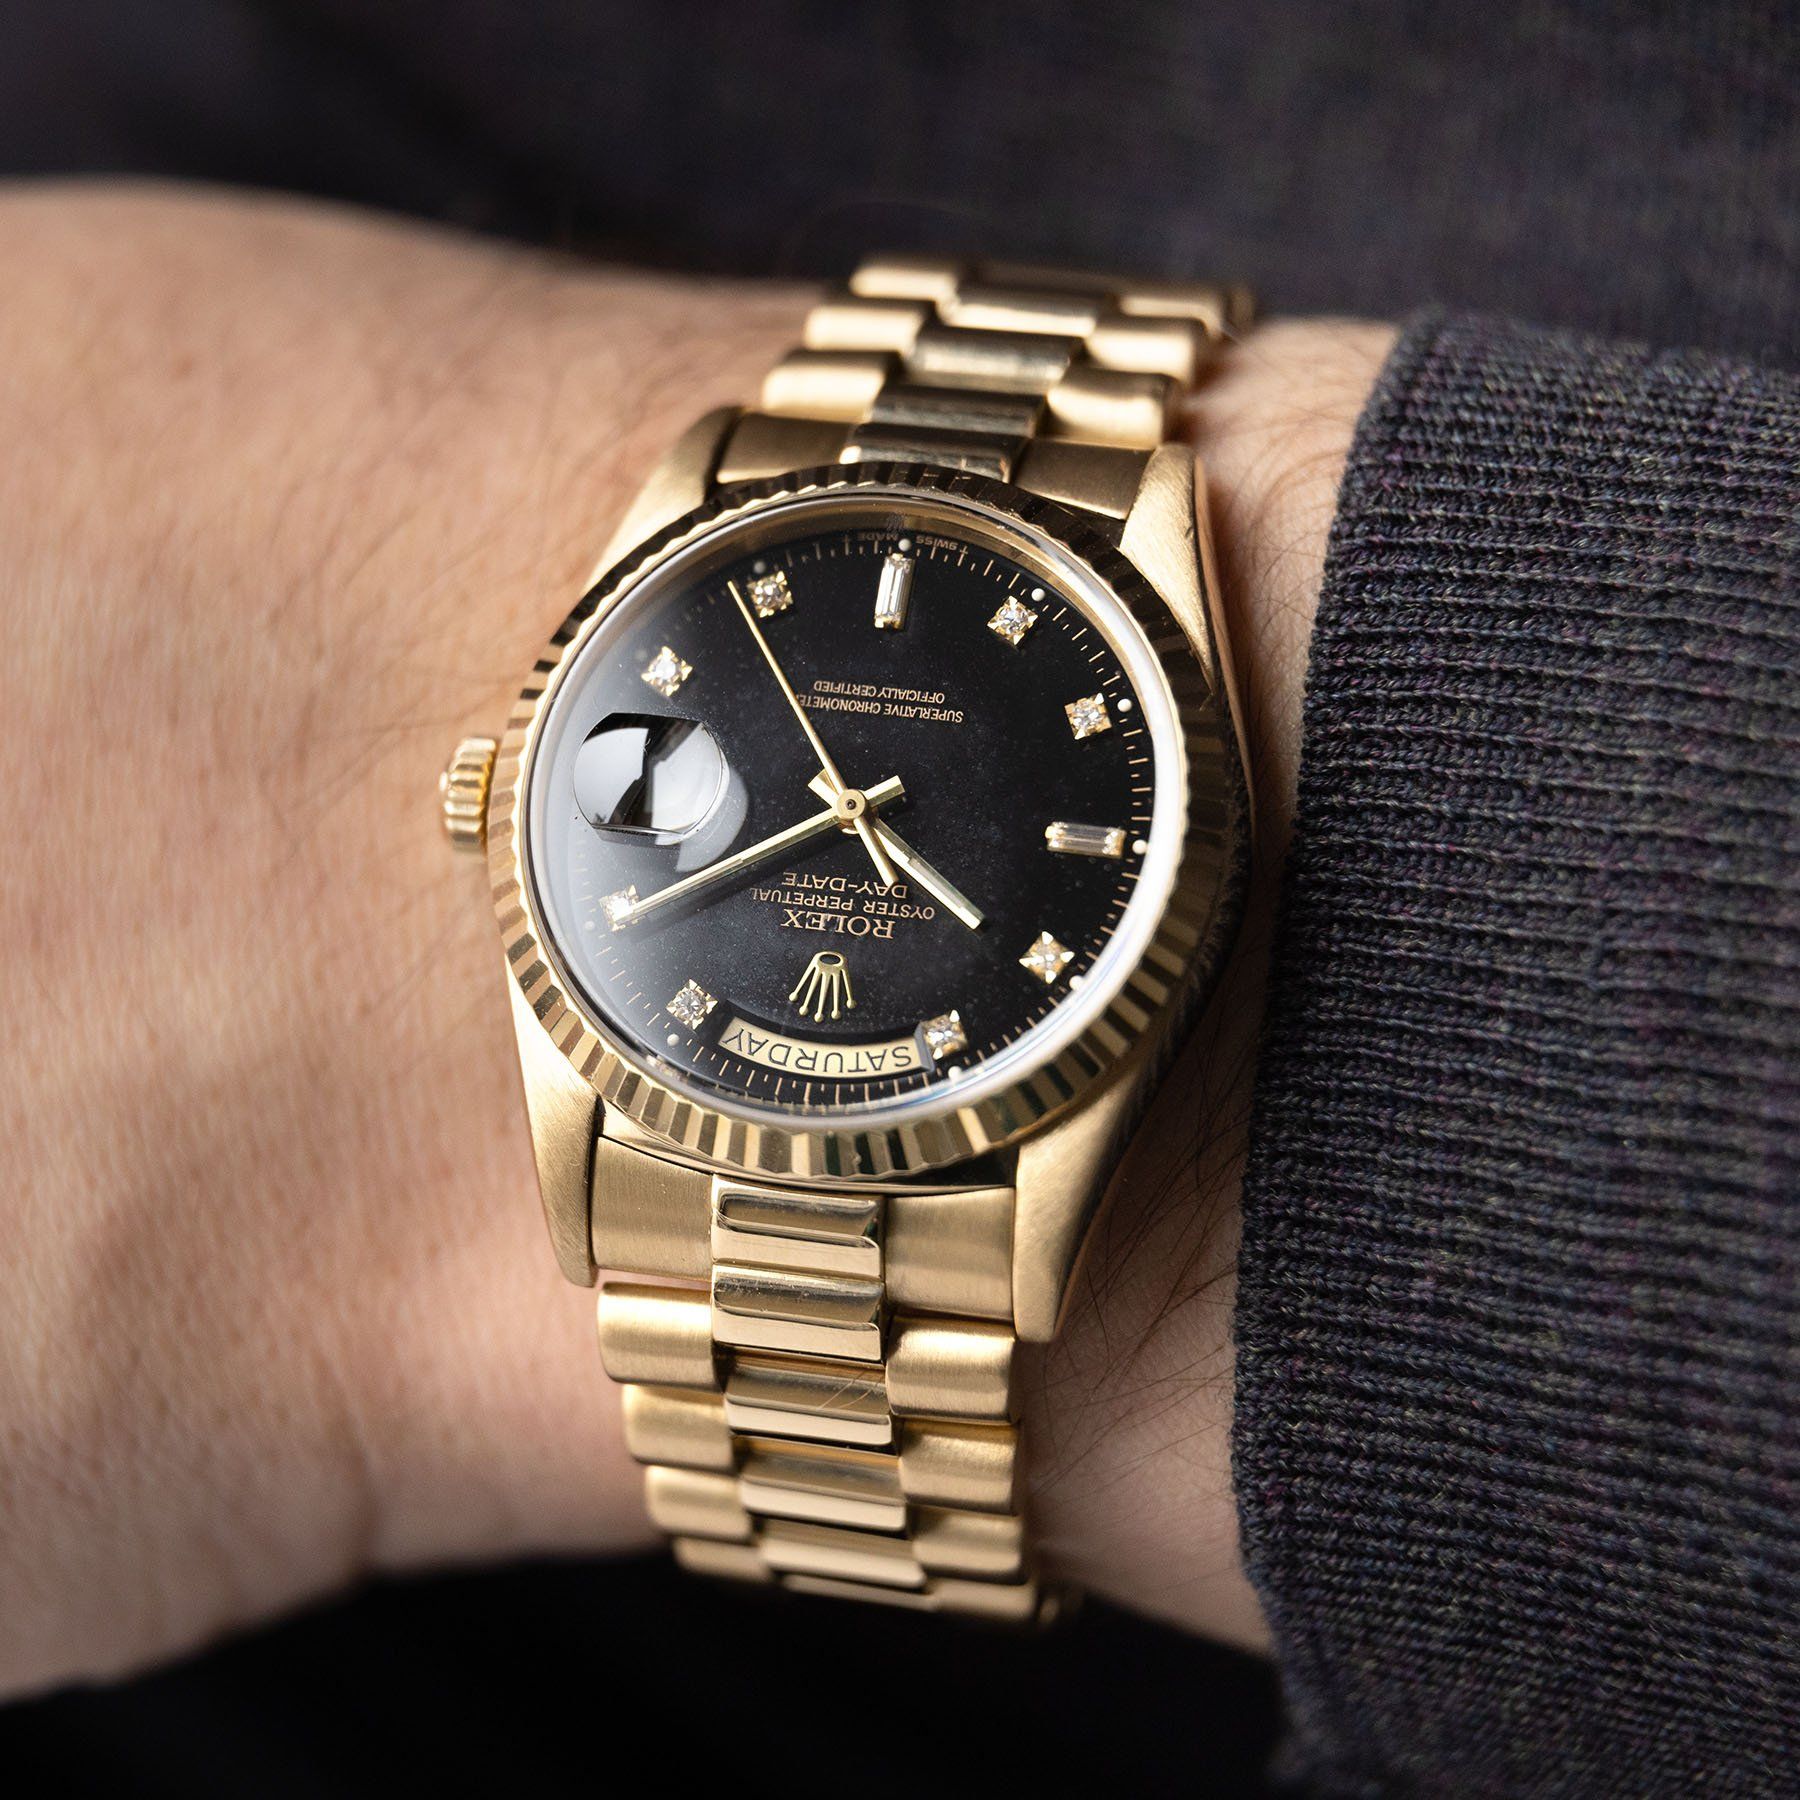 Rolex Day-Date Reference 18238 Black Diamond Dial